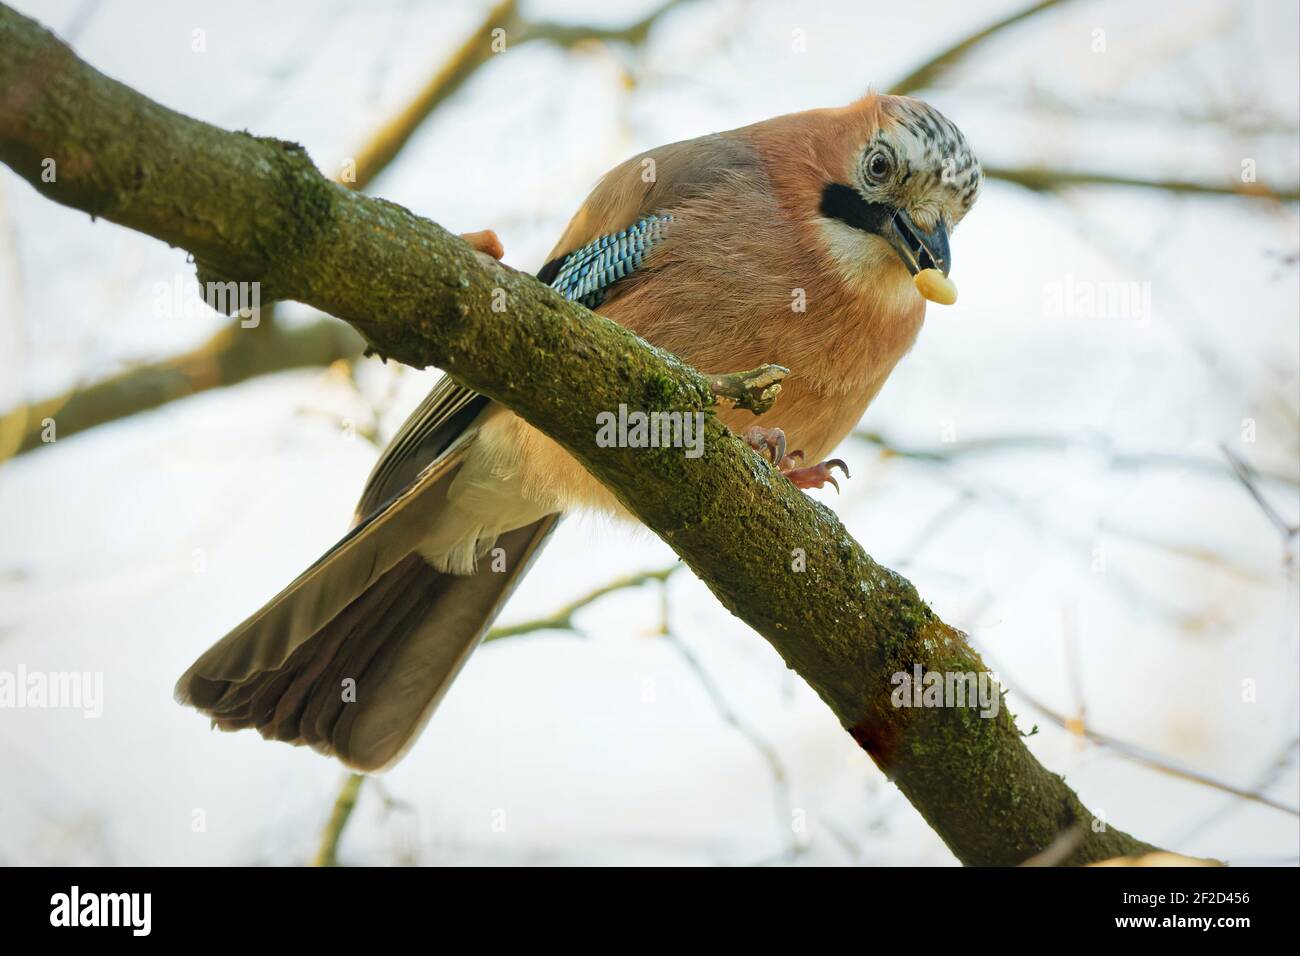 jay perches on a branch and eats an acorn Stock Photo